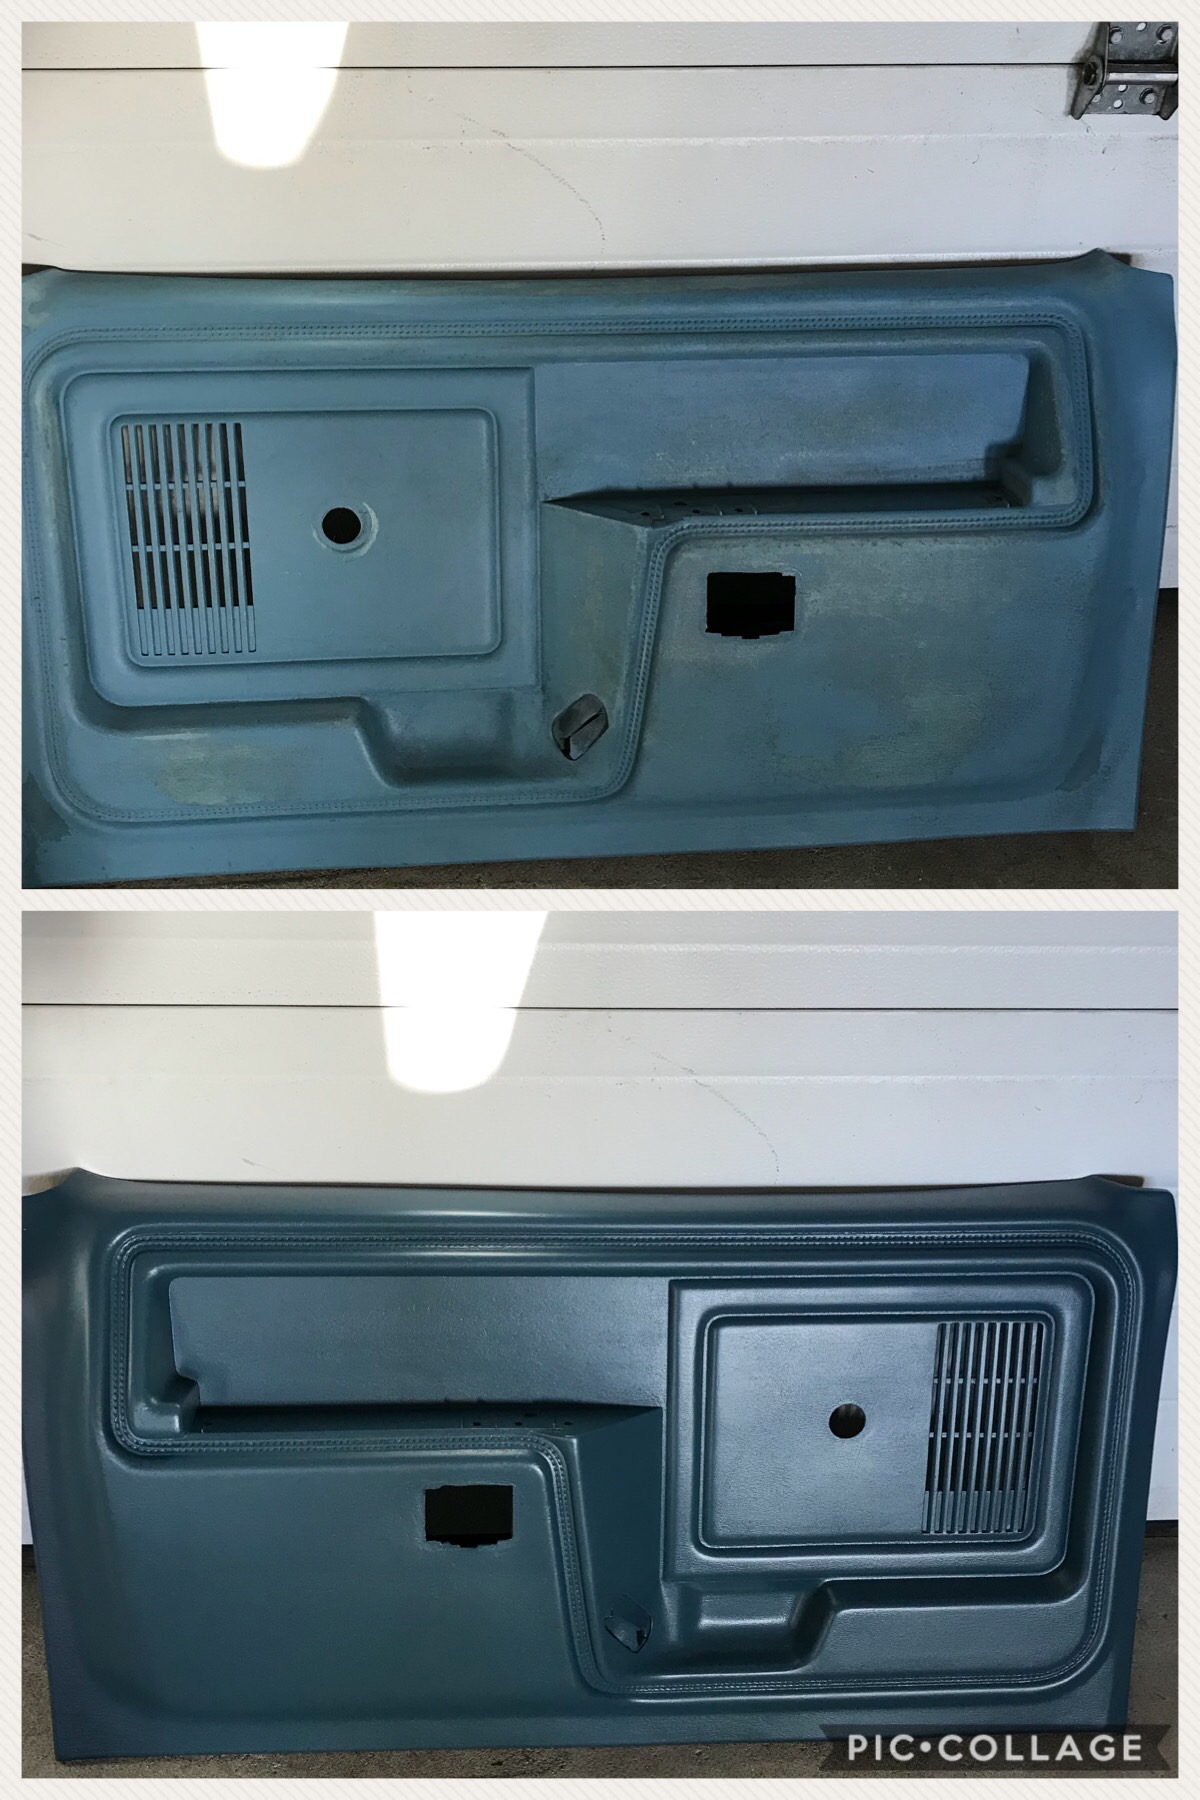 Top: before. Bottom: after paint